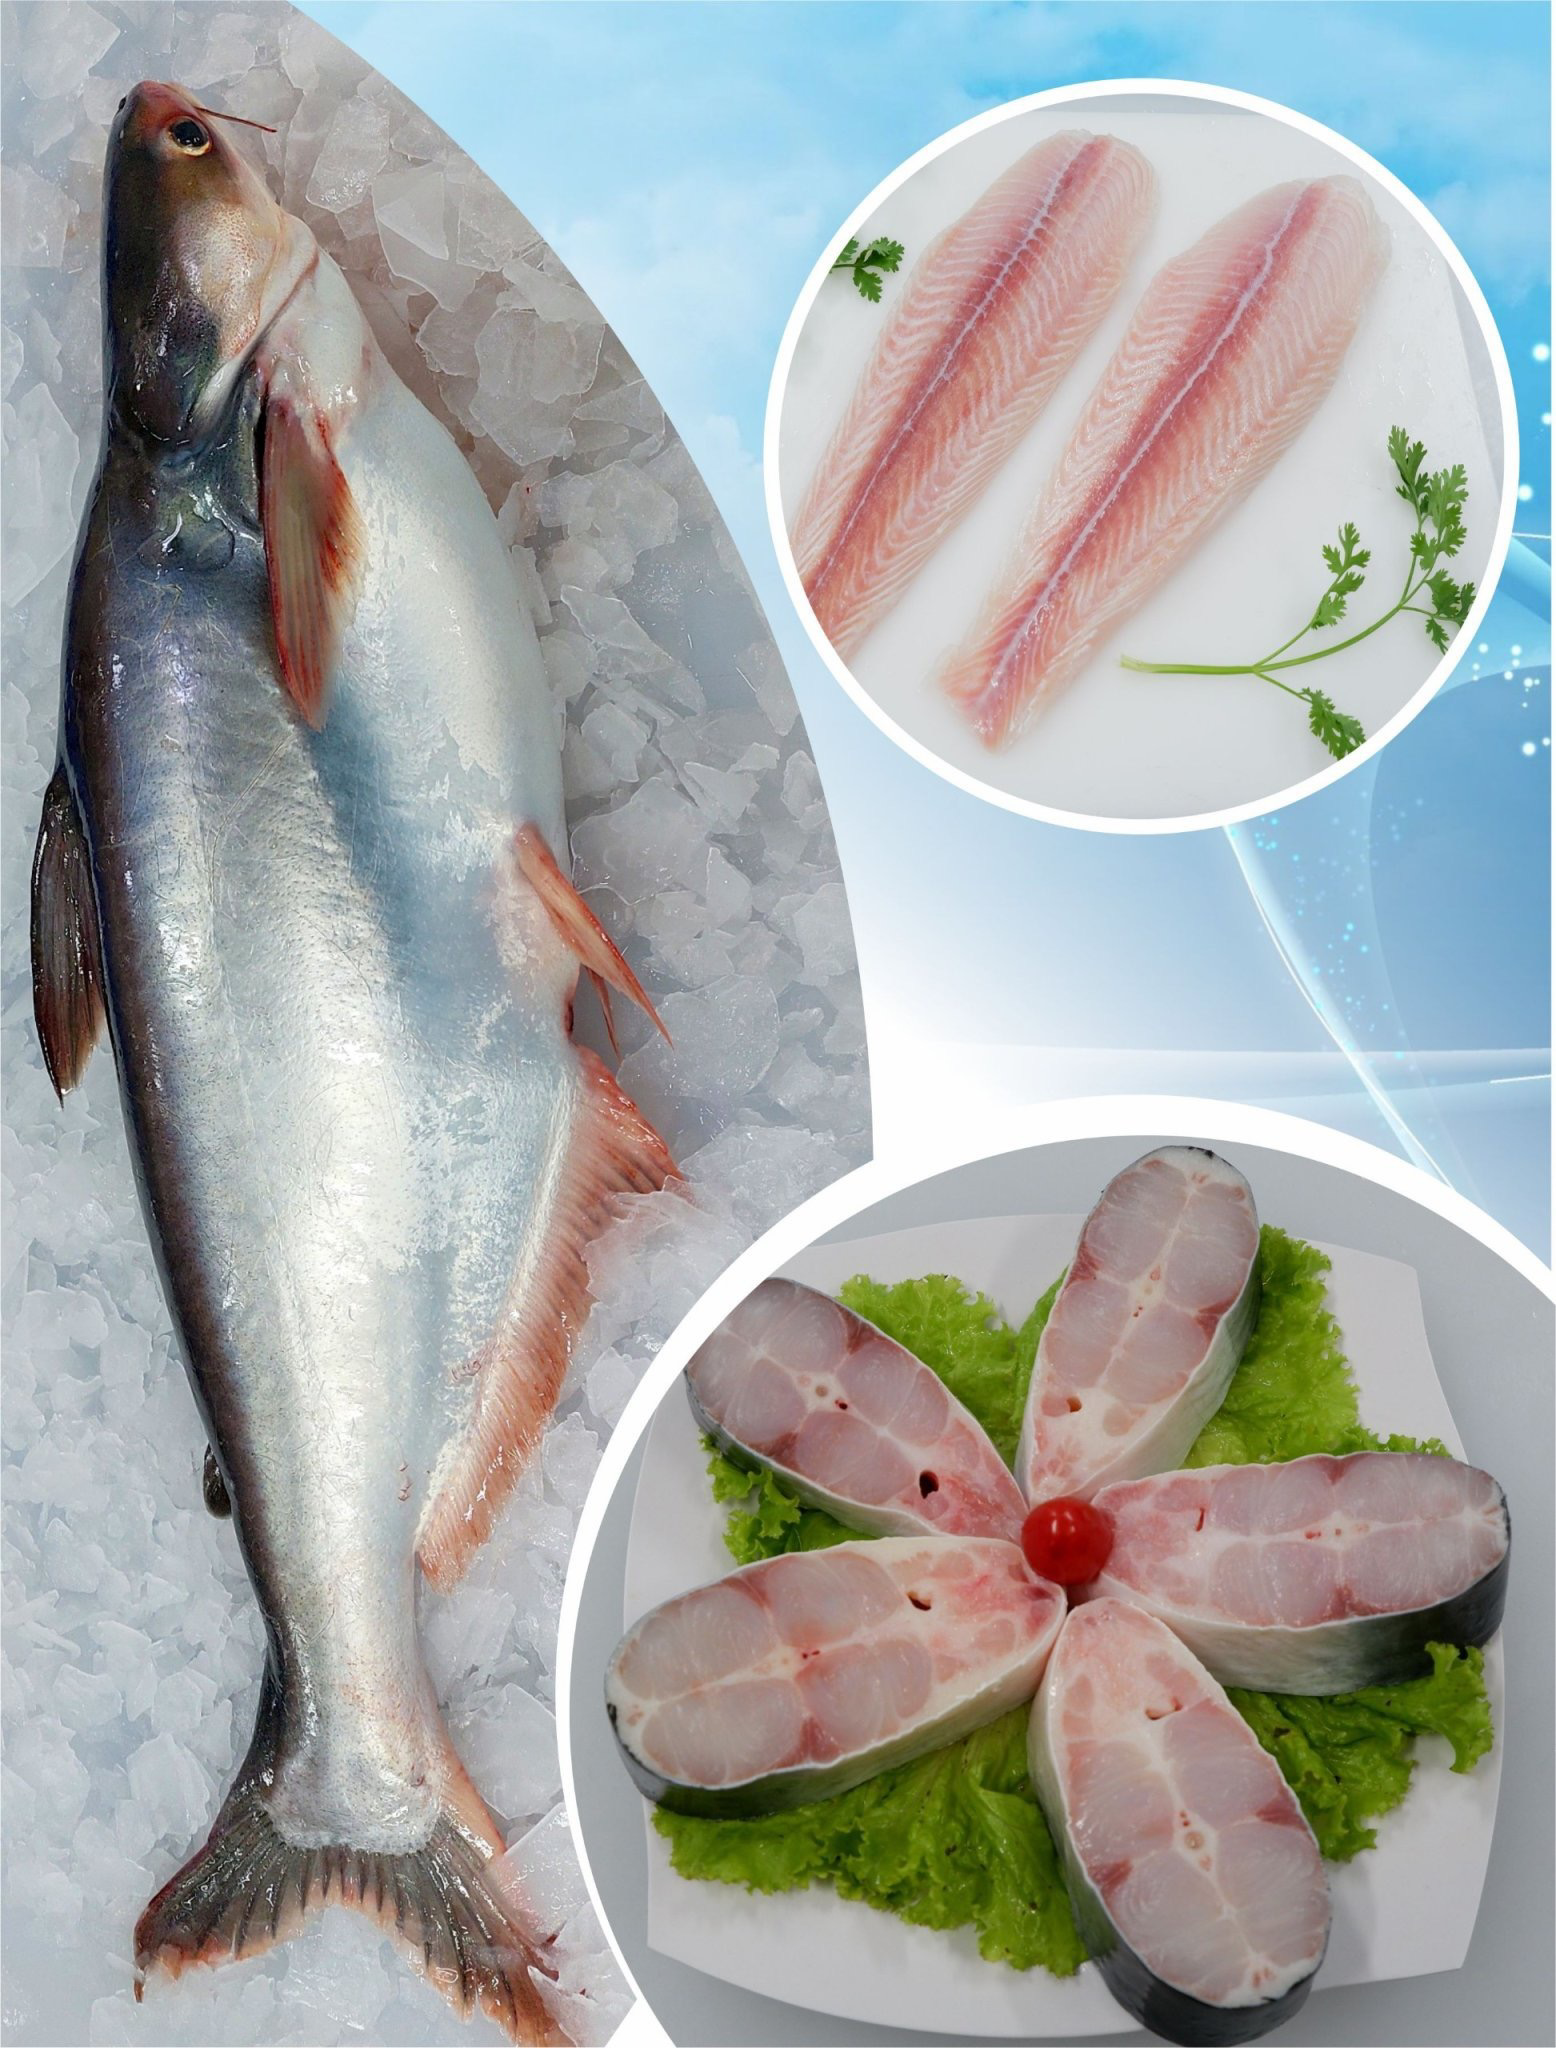 <span  class="uc_style_uc_tiles_grid_image_elementor_uc_items_attribute_title" style="color:#ffffff;">Frozen Pangasius Products</span>